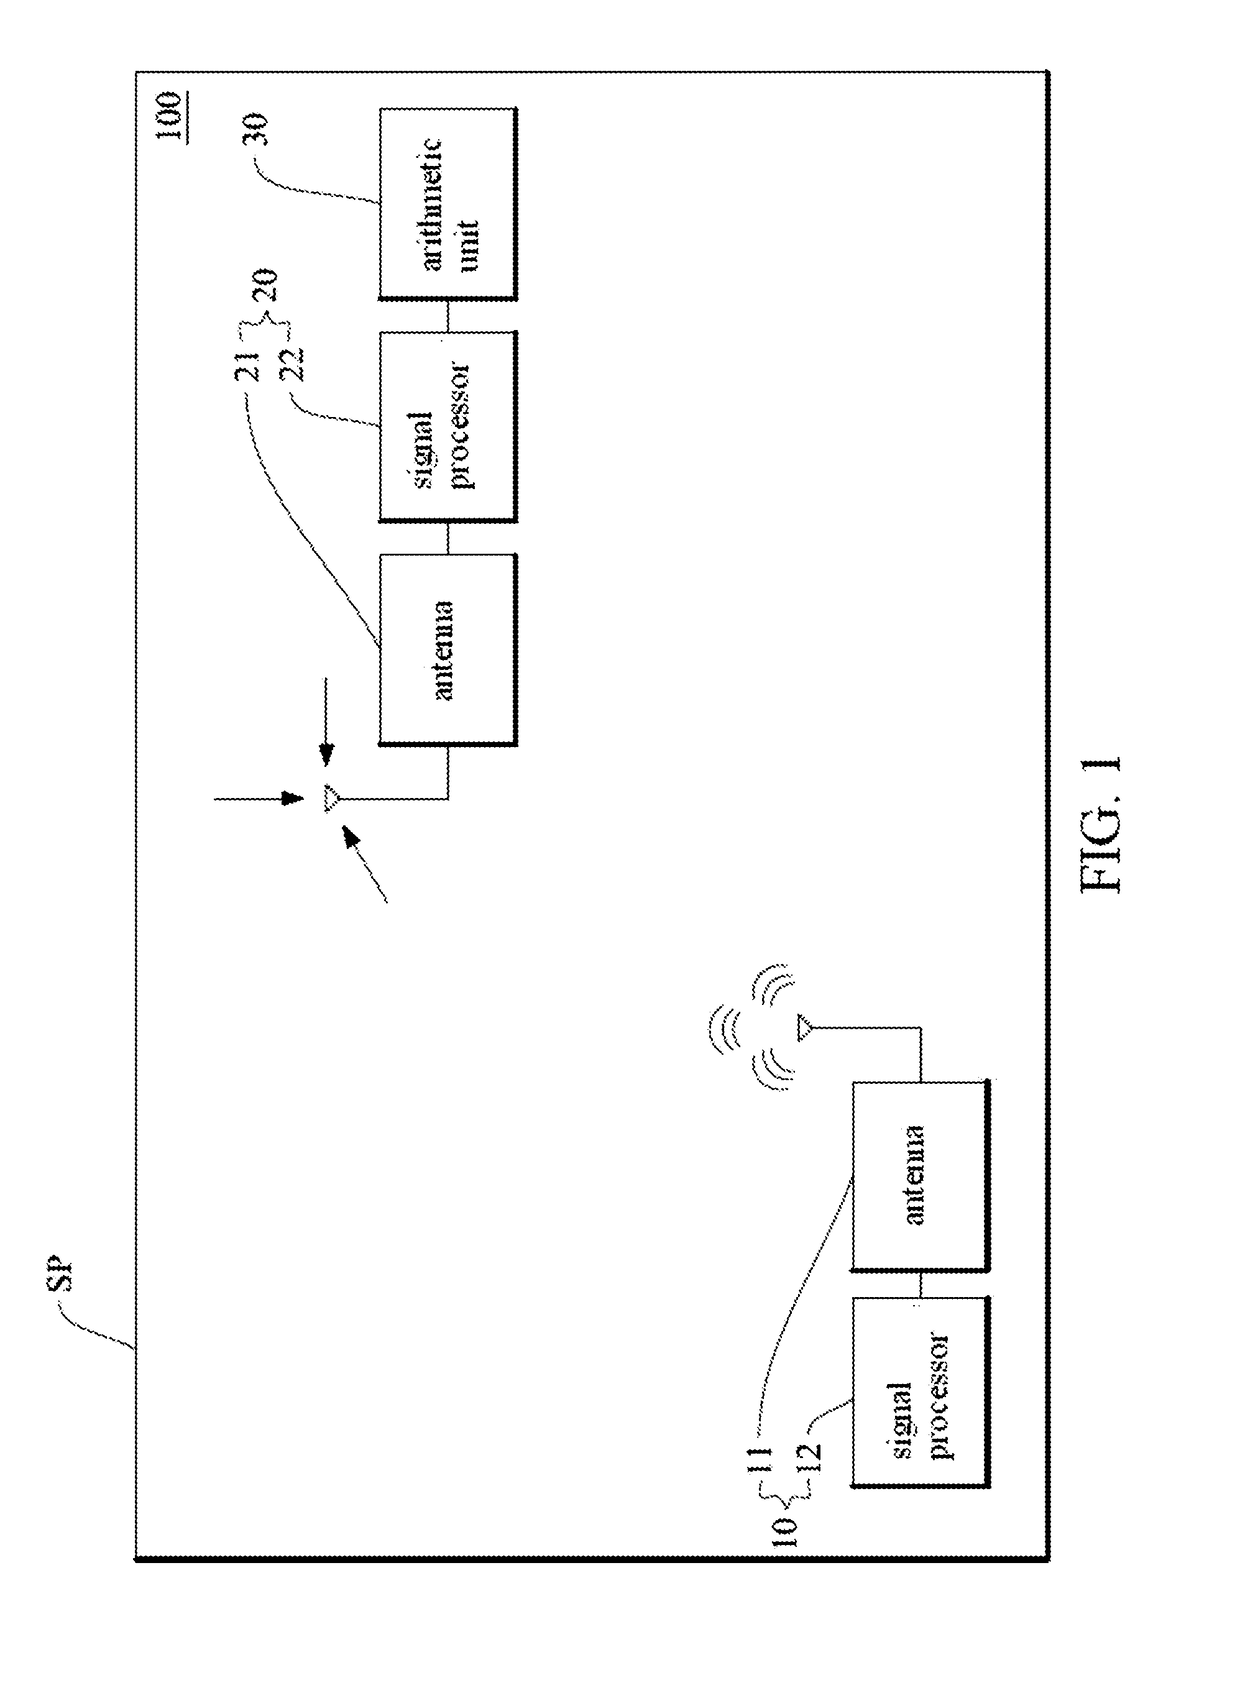 Sinr-based intrusion detection system and method thereof